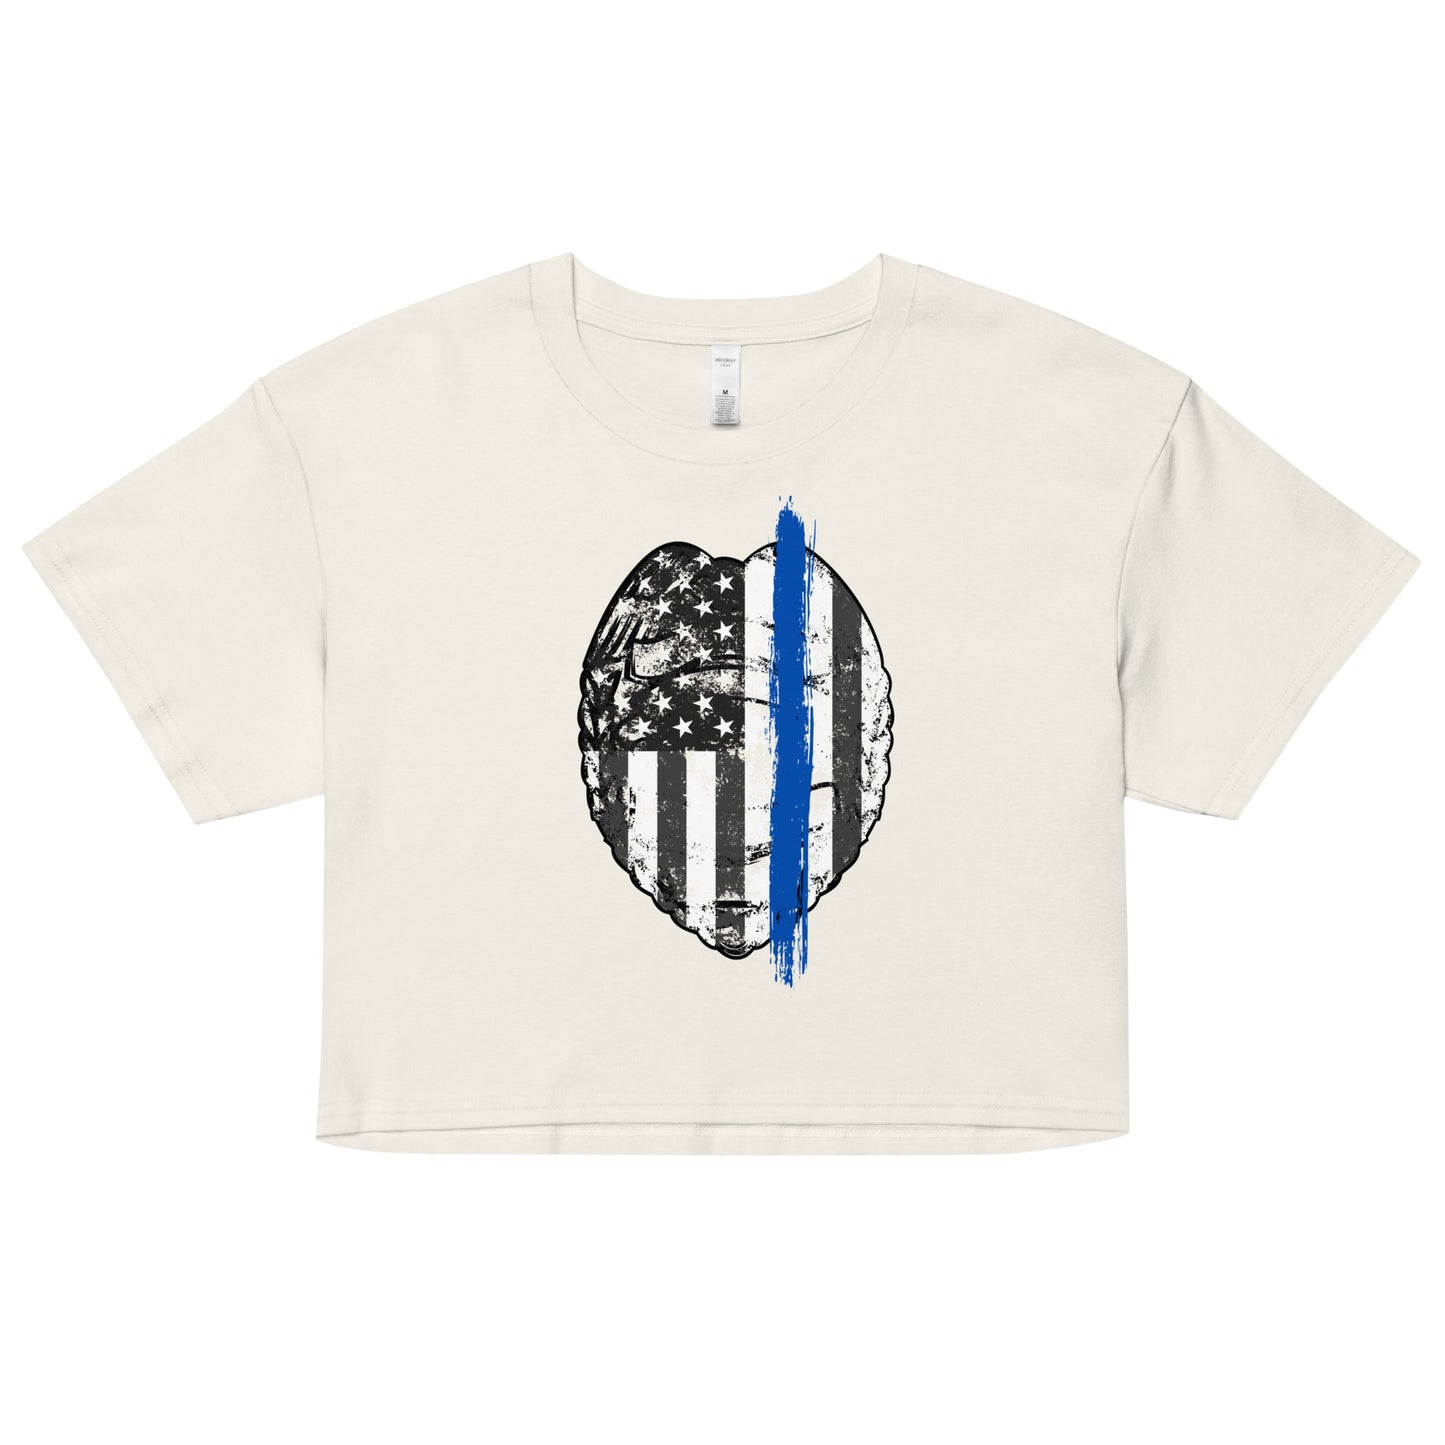 Back the Blue Women's Crop Top. Law Enforcement Thin Blue Line shirt in off white.